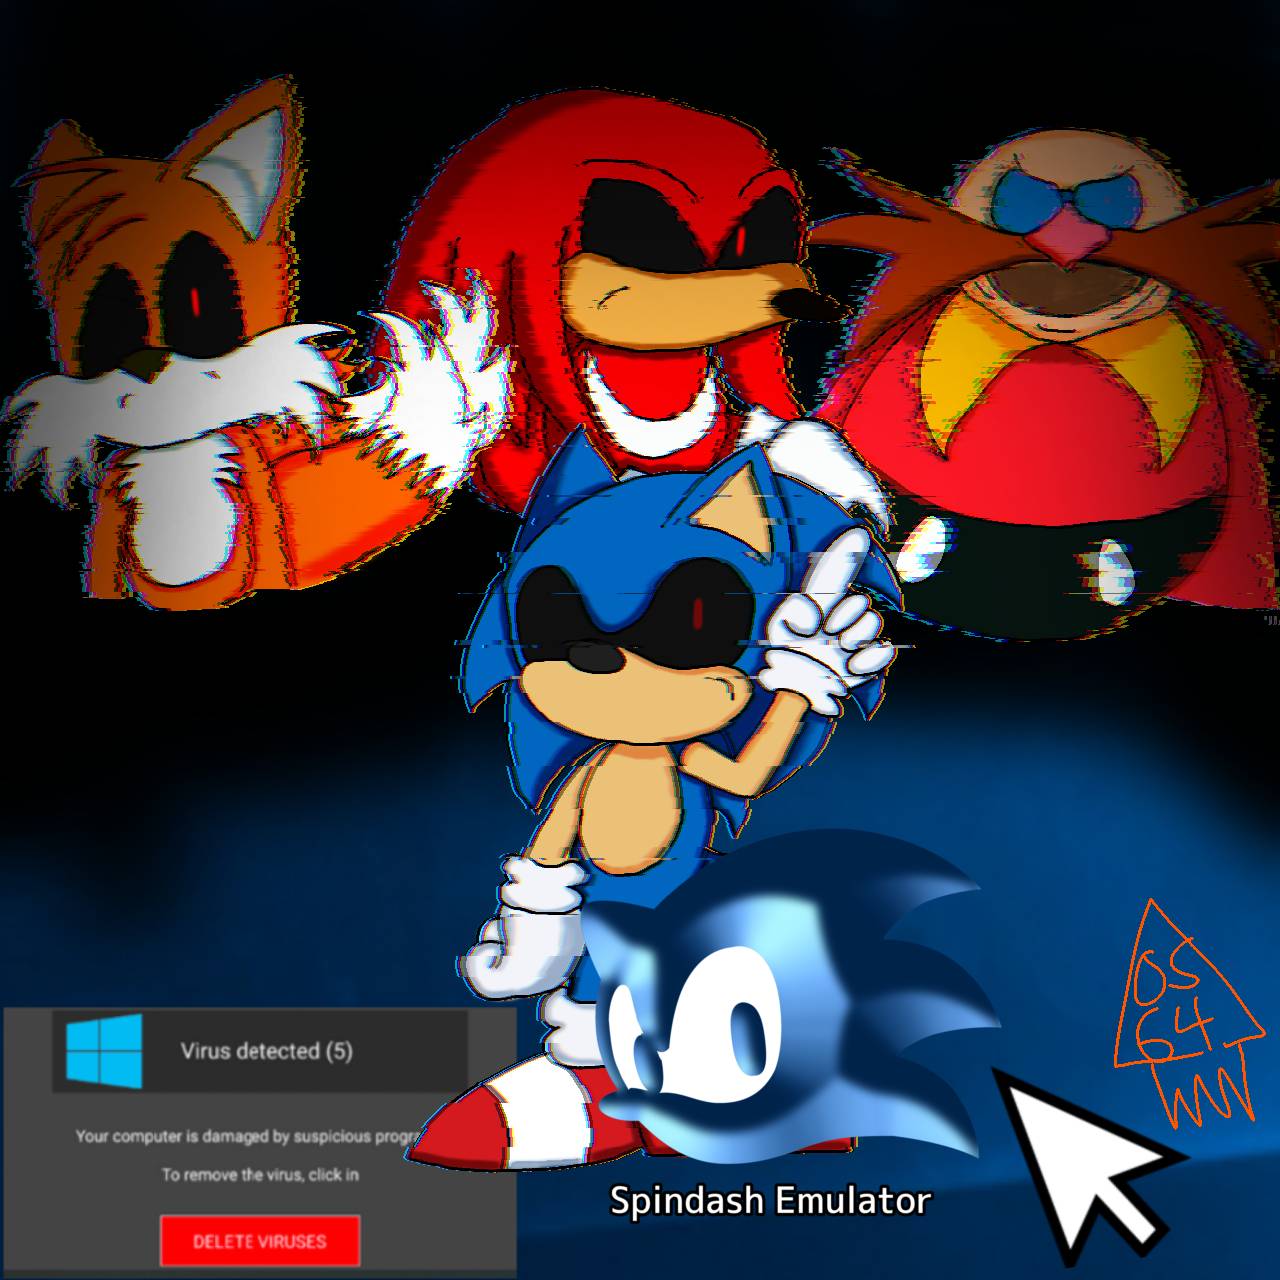 Makng Sonic.Exe v3 out of the files in the game and leaks. This includes  doing assets for the characters who don't have and stuff. If anyone want to  join discord is: Frostmoon#9592 #